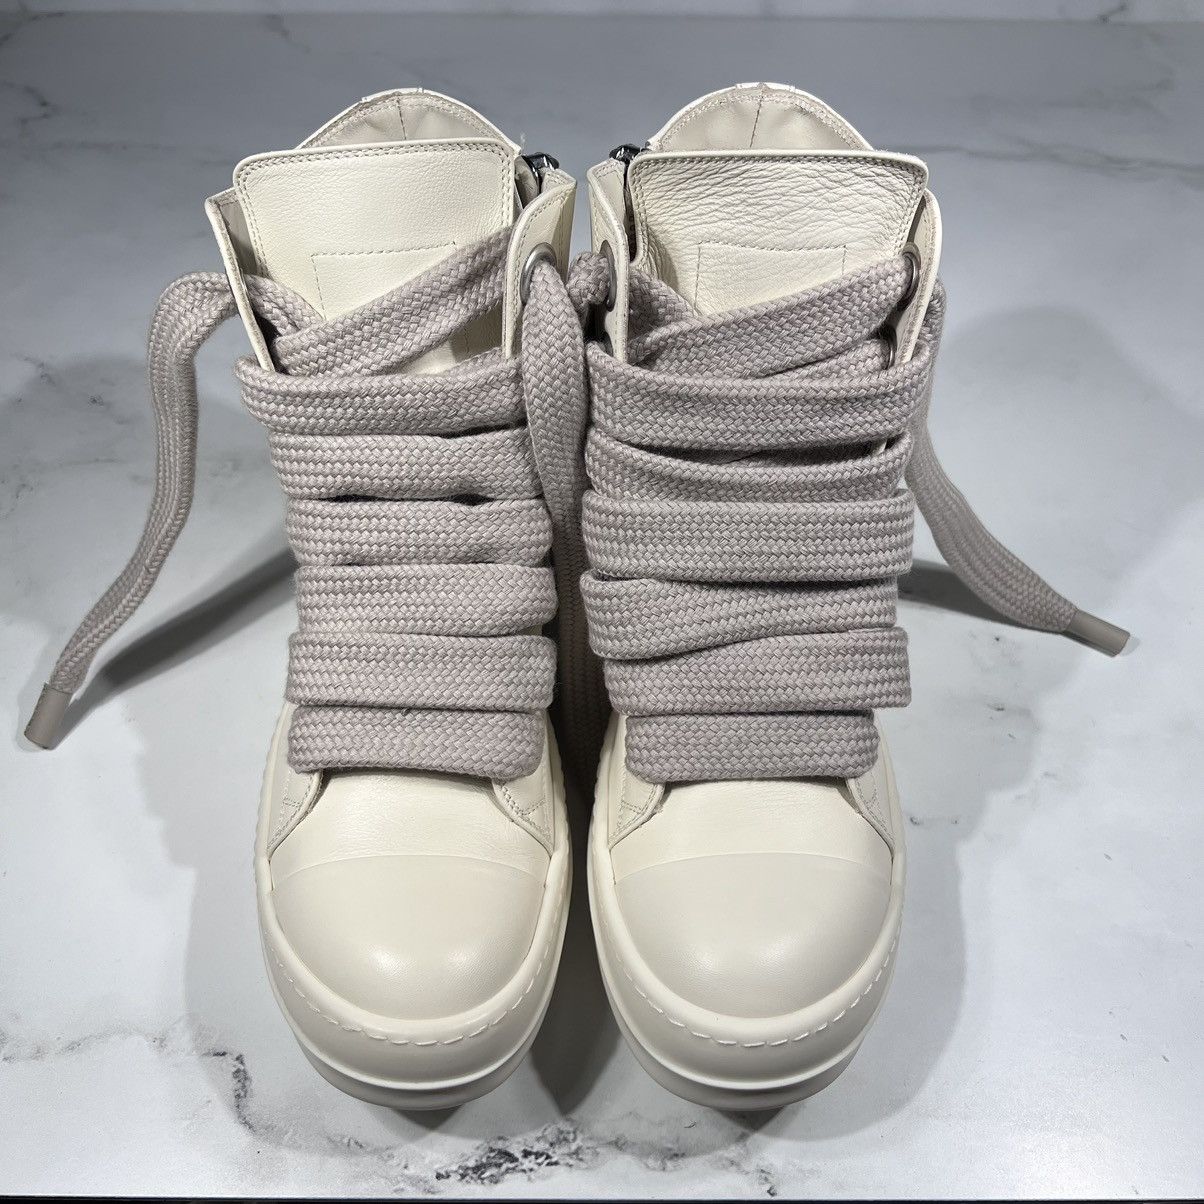 Rick Owens Rick Owens Ramones Milk Leather Thick Lace High Top Sneakers Size US 7 / IT 37 - 8 Thumbnail